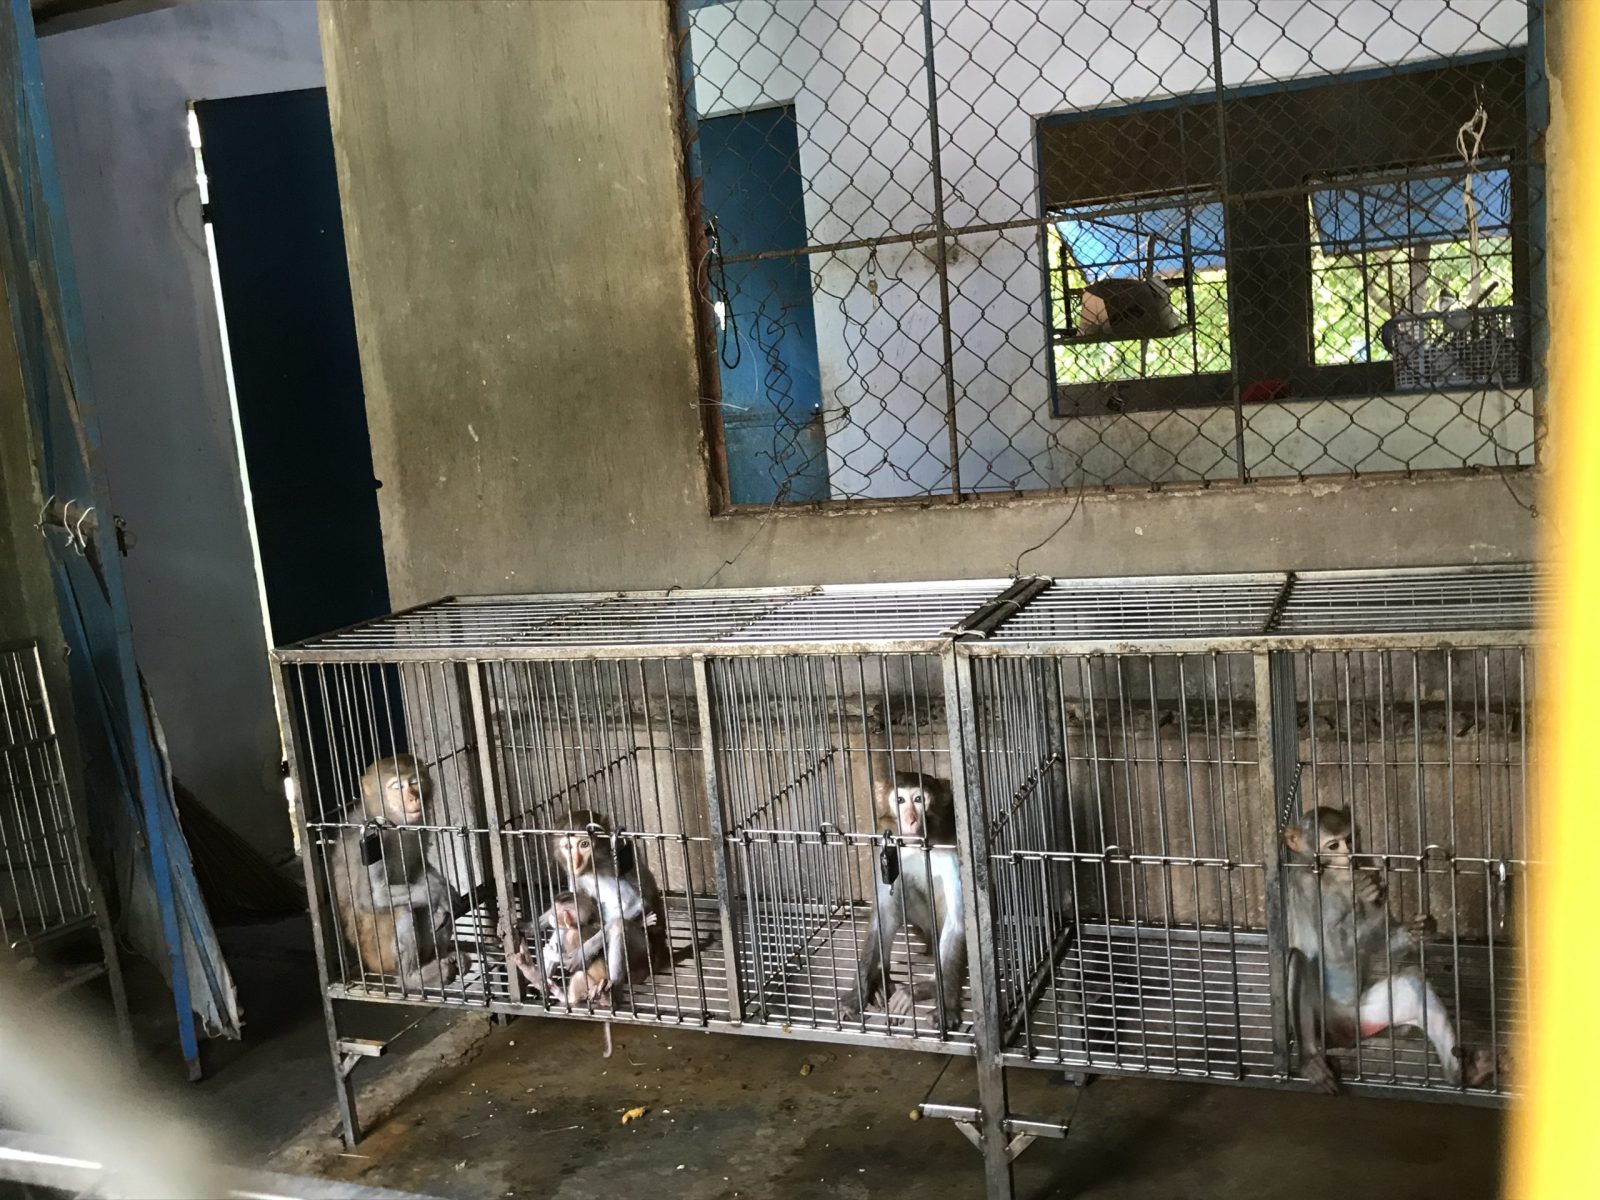 Monkeys being held in tiny metal cages